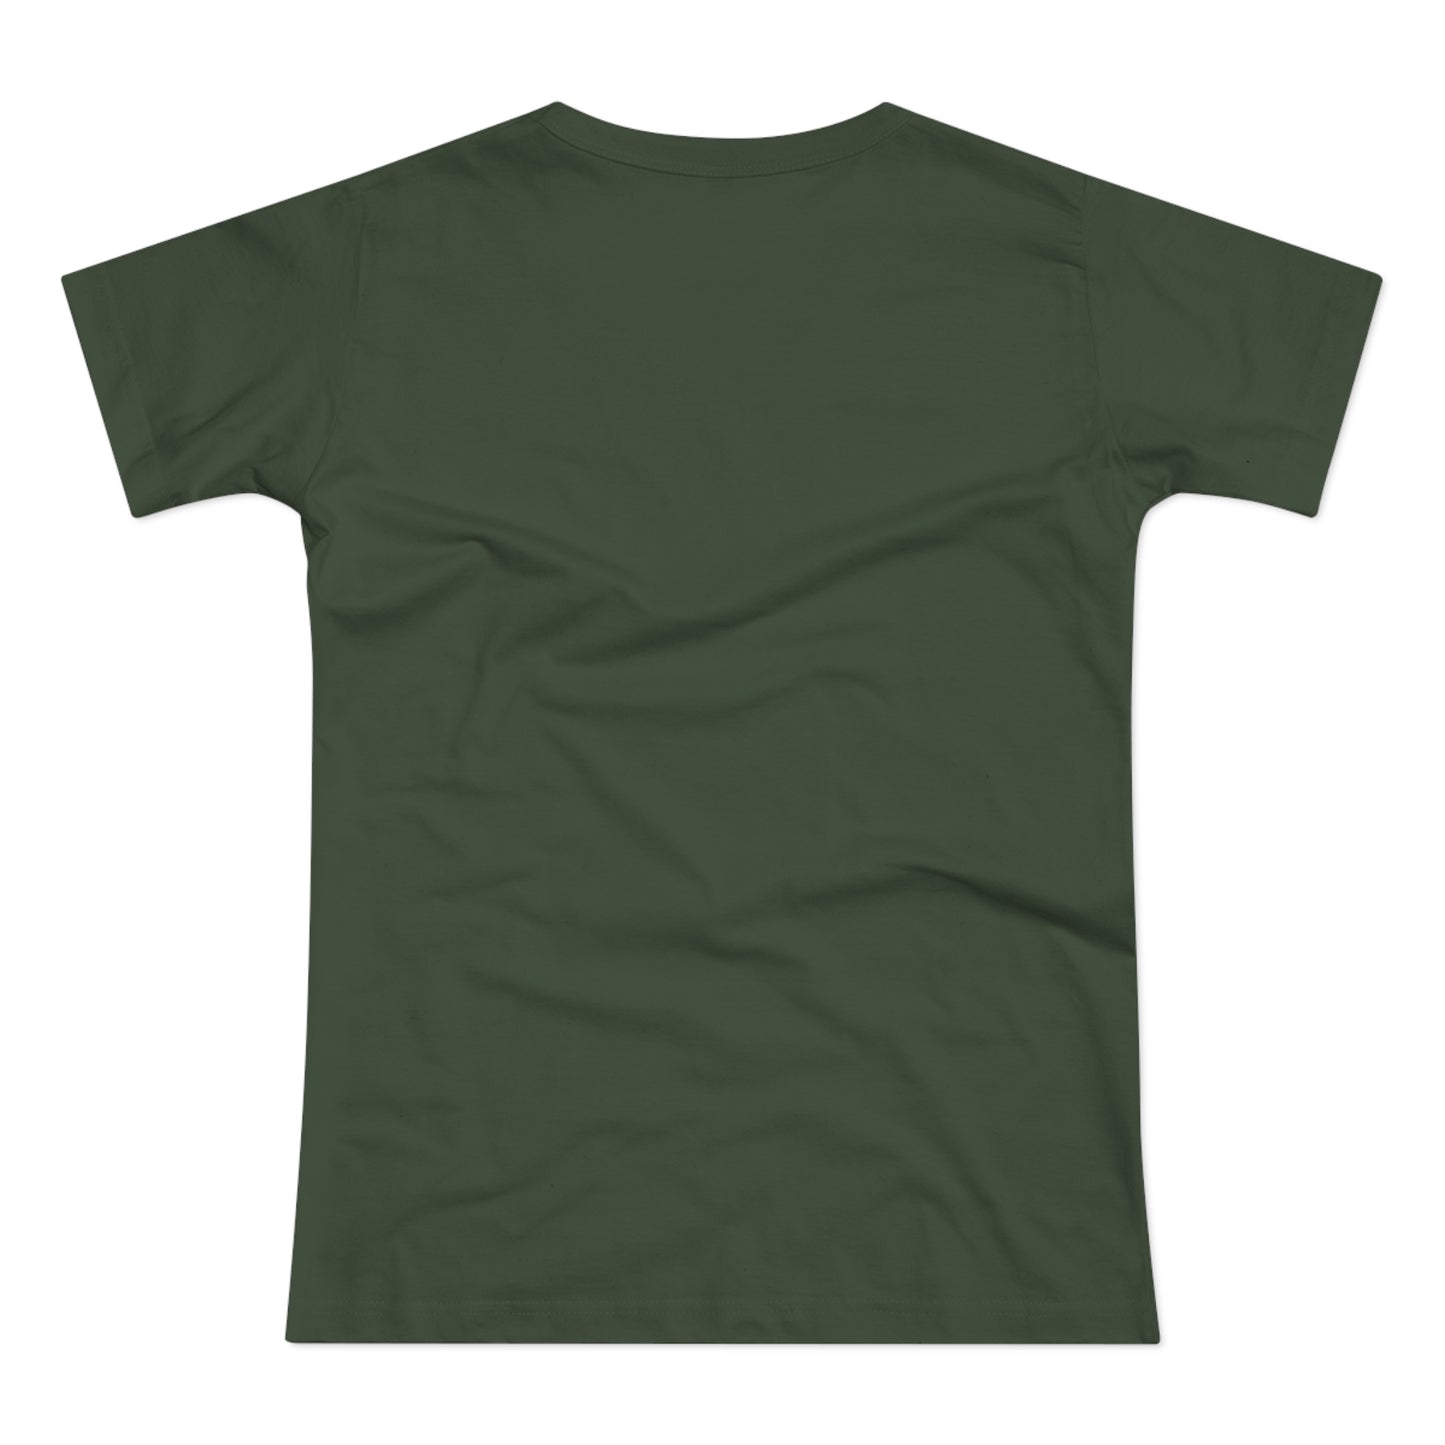 a dark green t - shirt with a white background